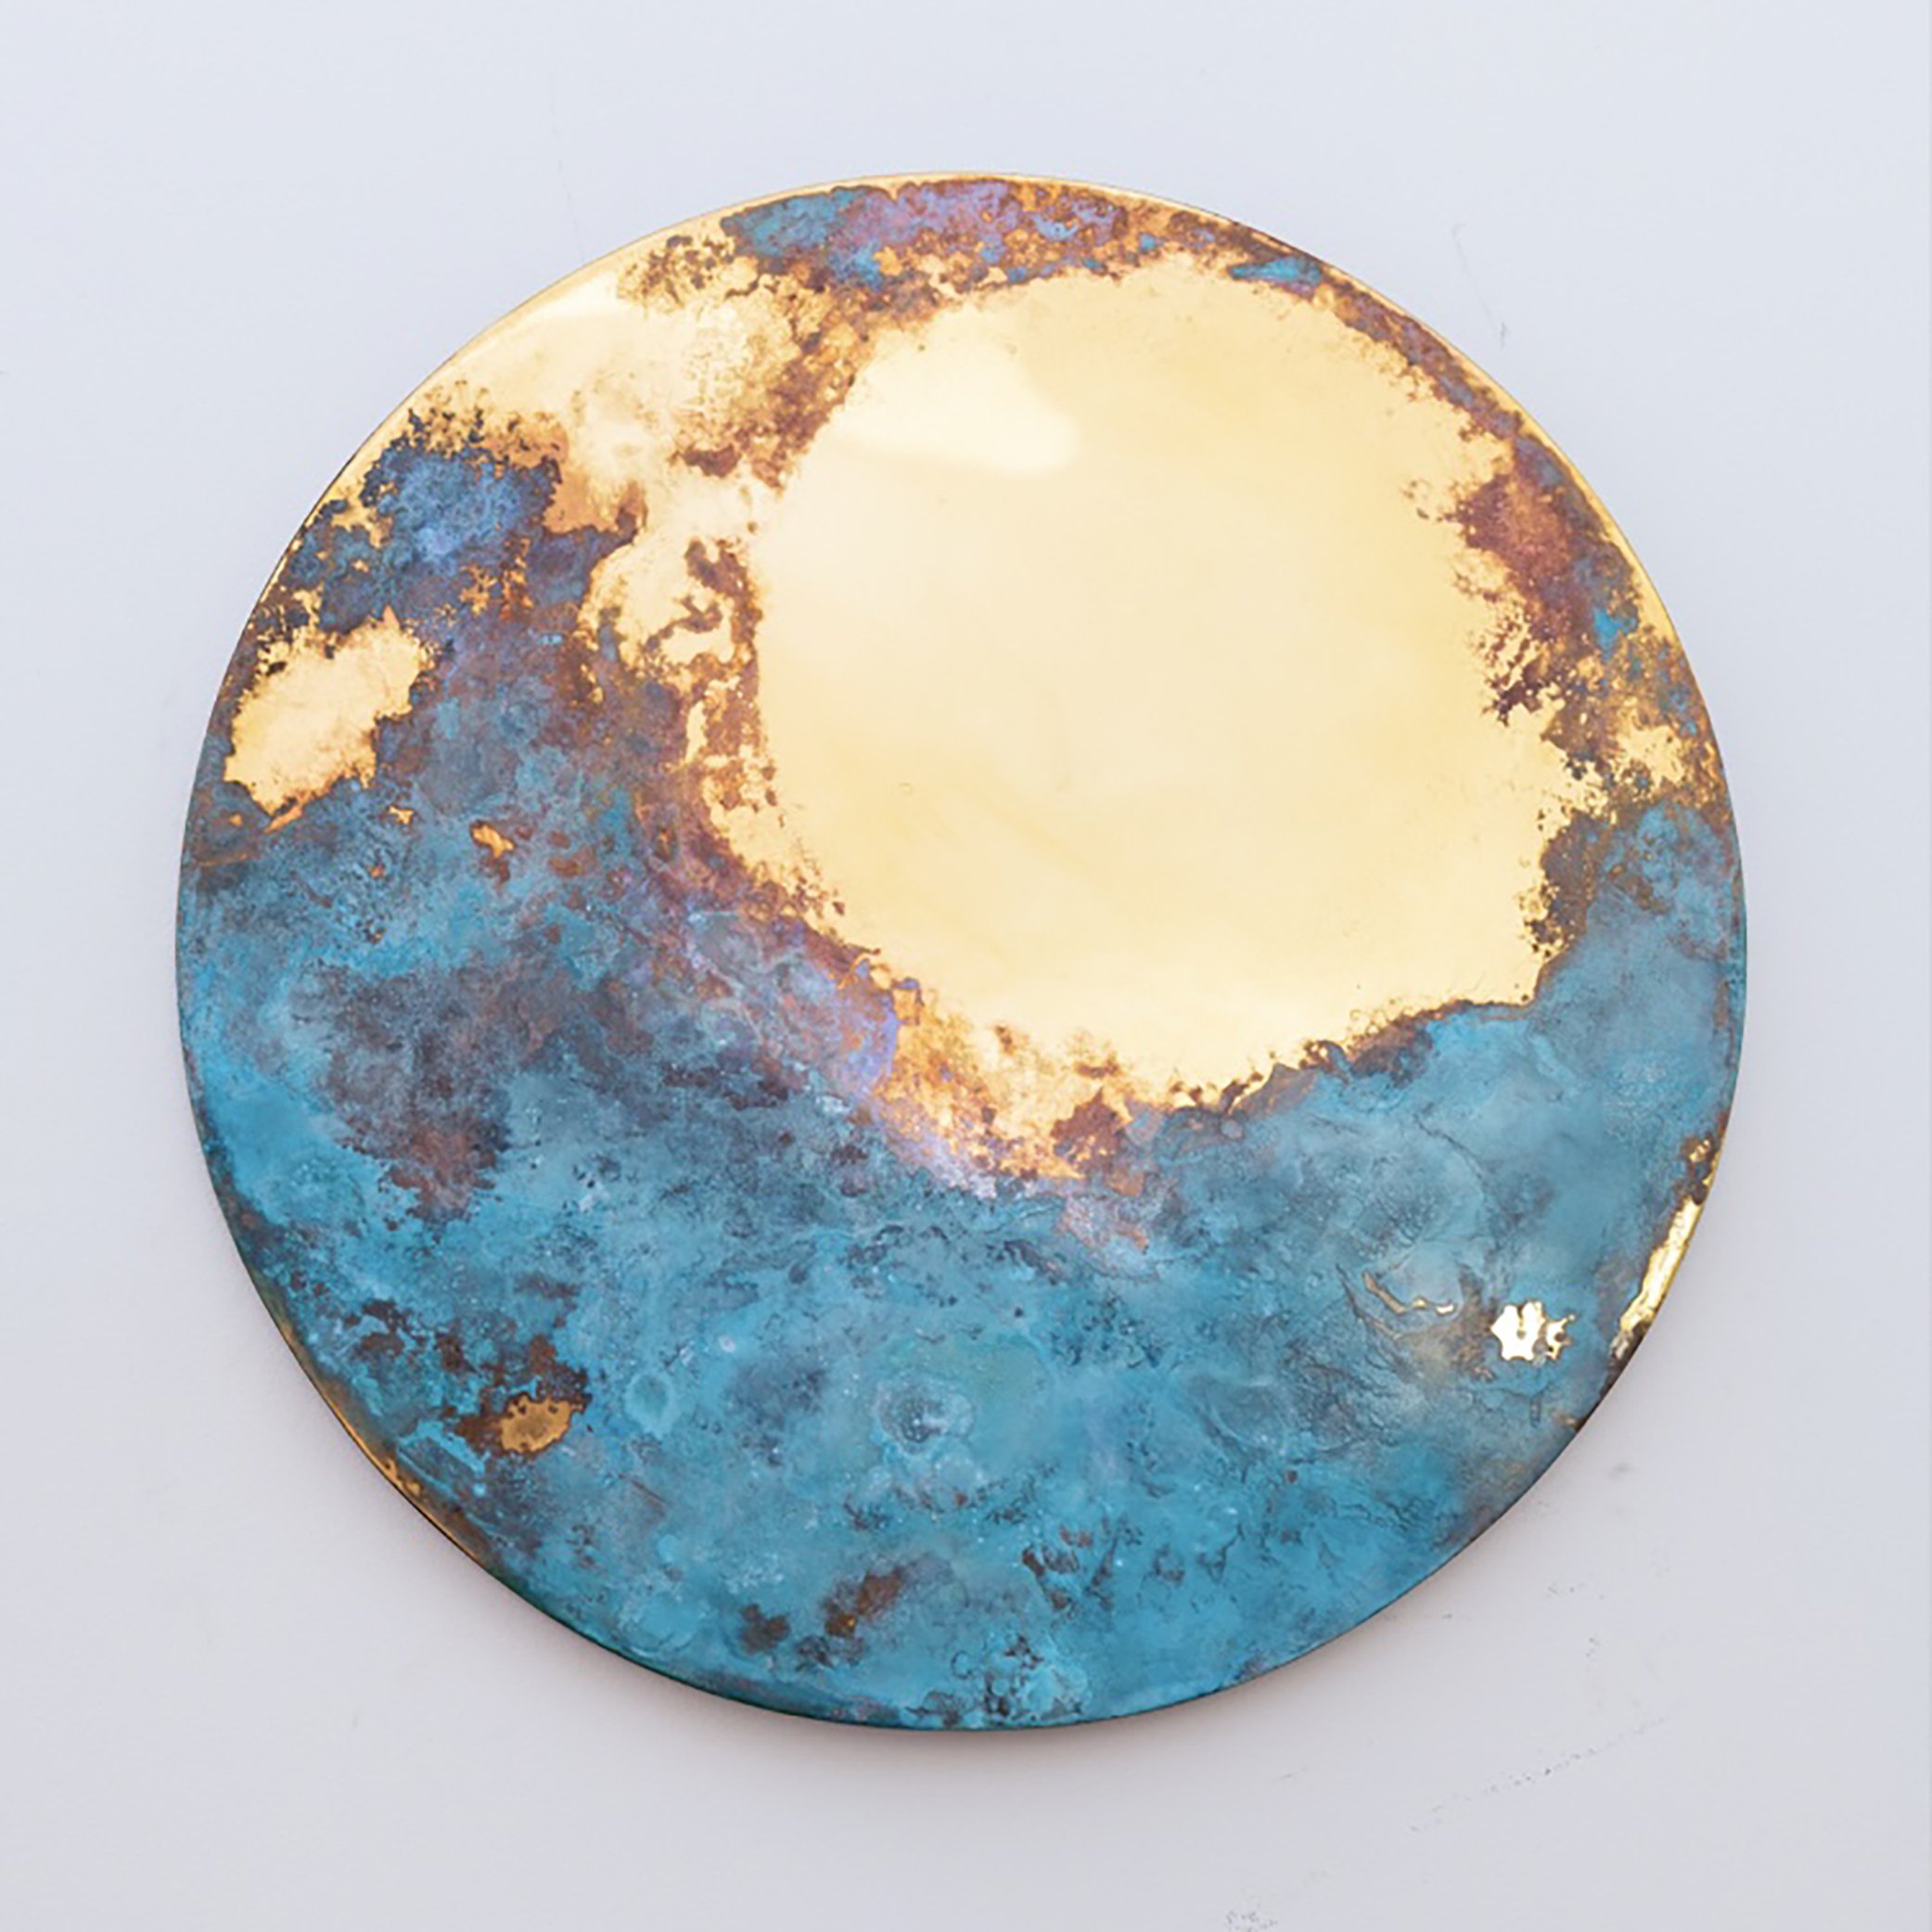  Hand polished solid bronze mirror, verdigris patinated surface 